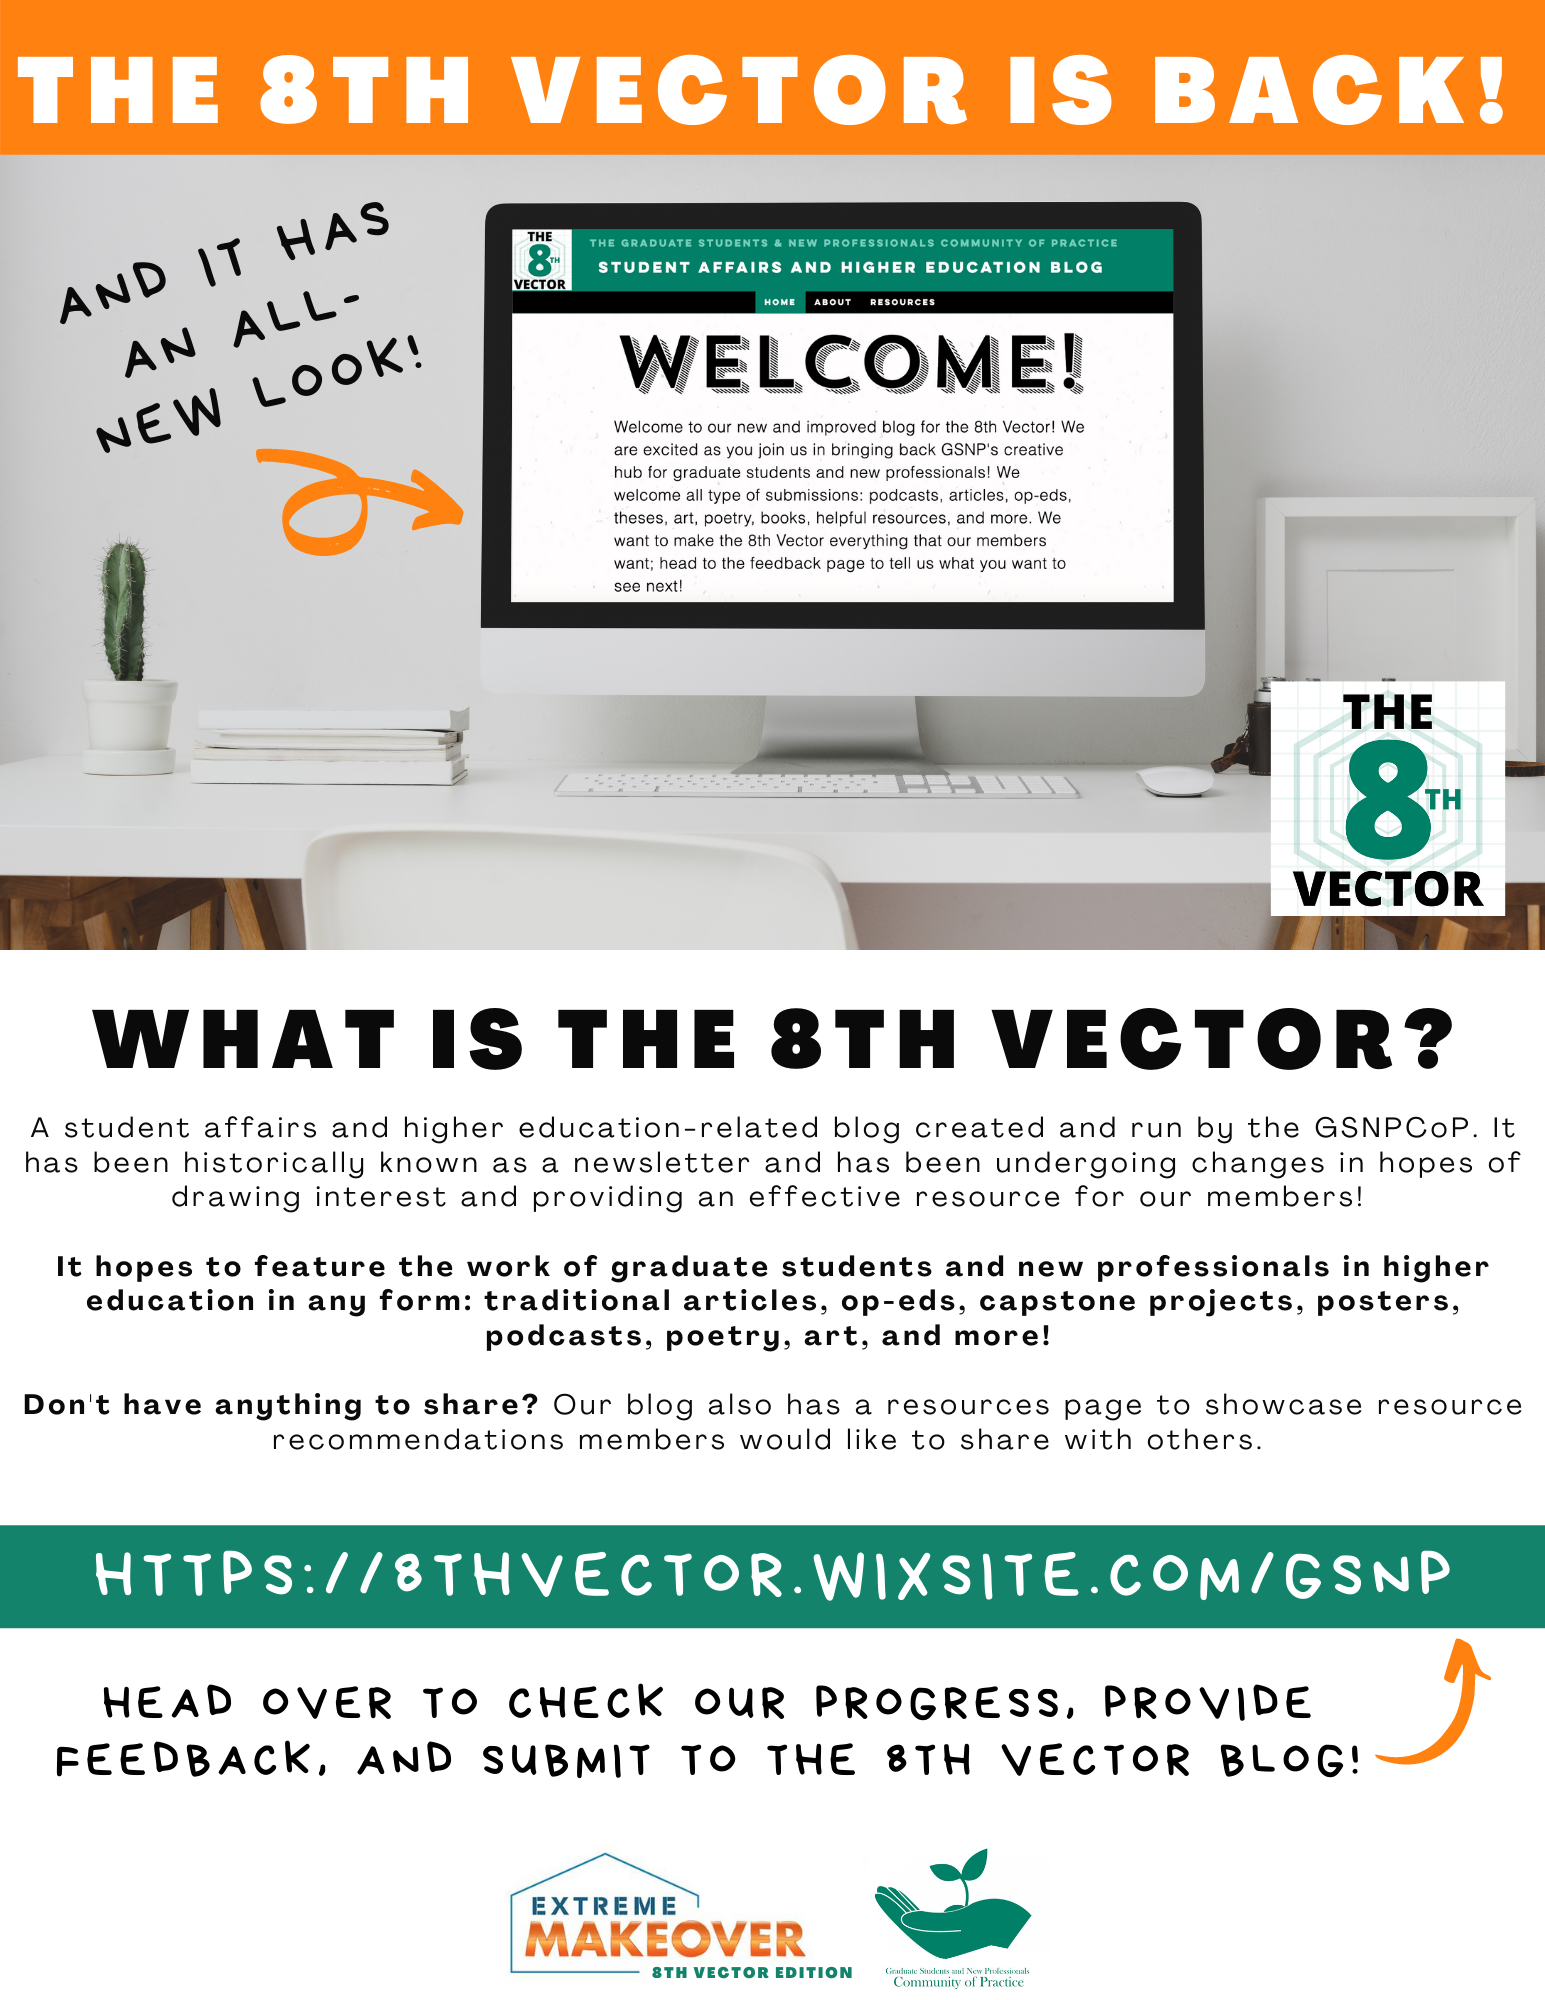 Head over to the 8th Vector blog to check out our progress, provide feedback, and submit content! 